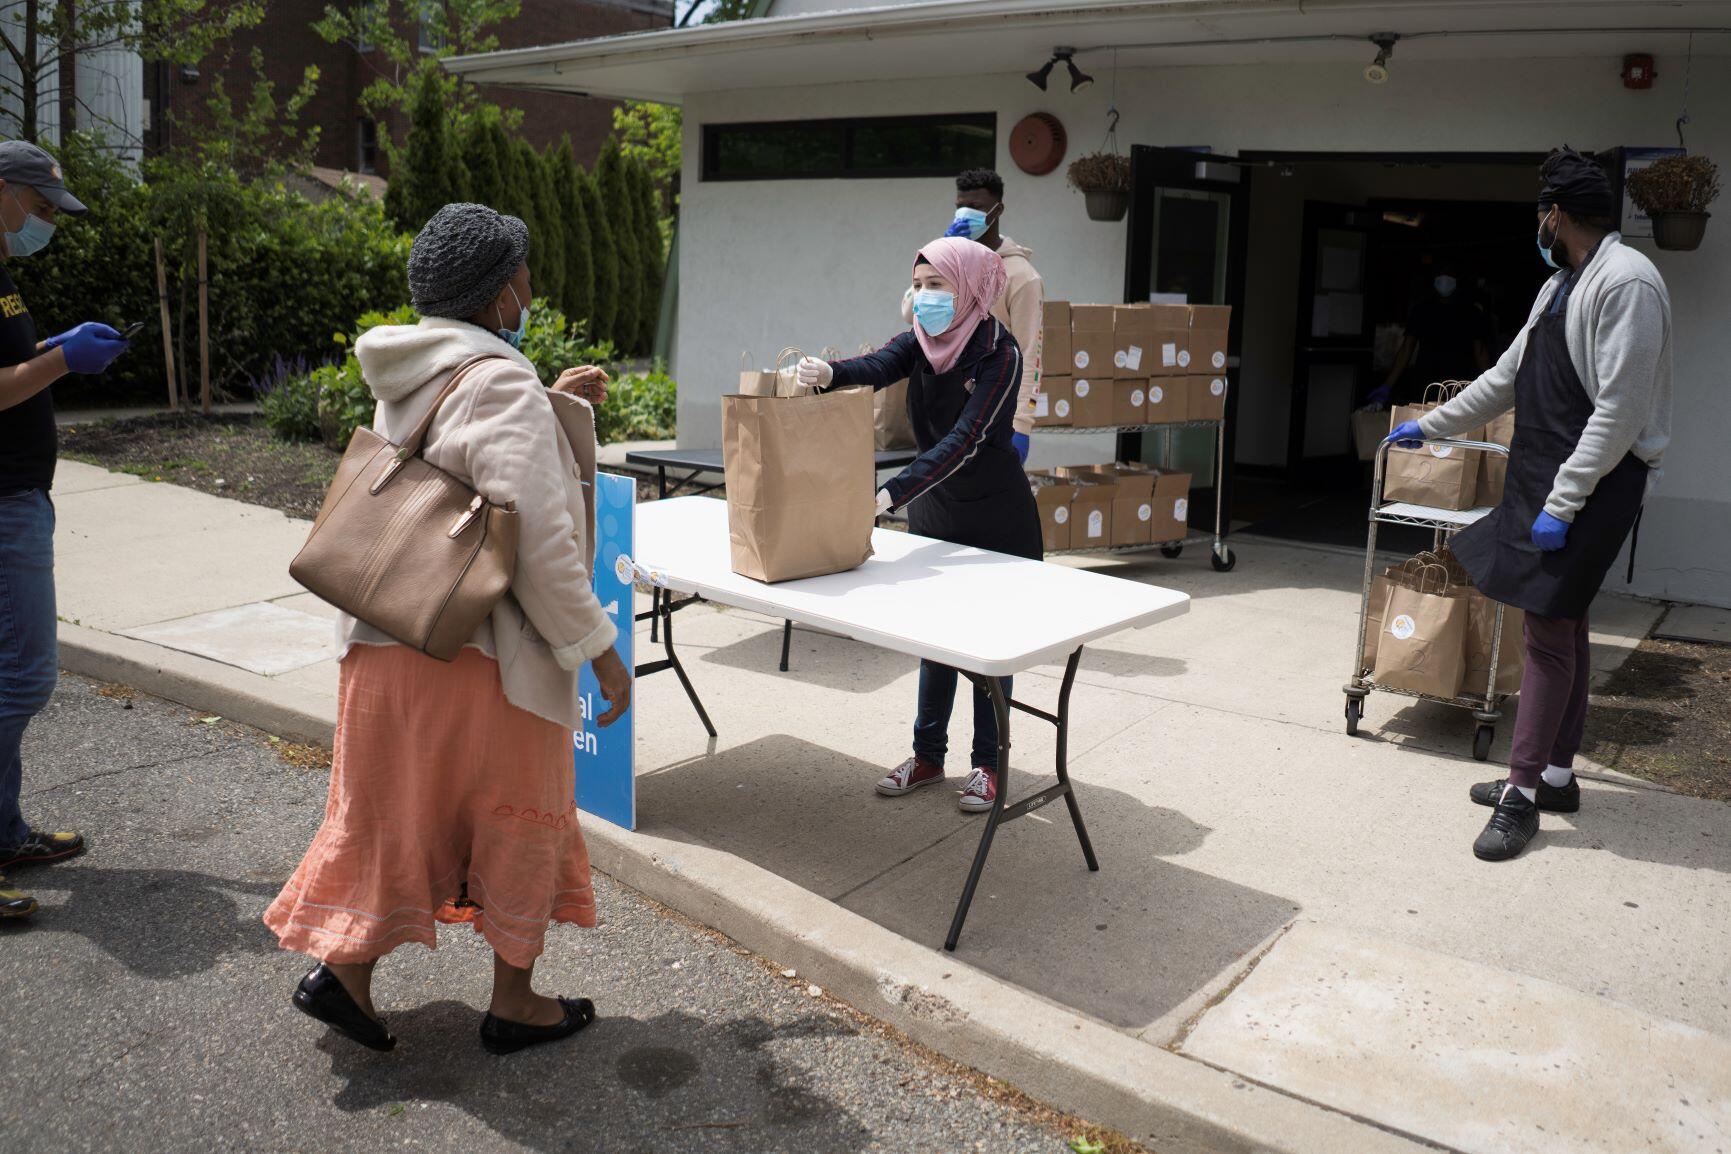 Rania Abou, a nineteen-year-old refugee from Syria, hands out food at her job with WC Kitchen and the IRC in Elizabeth, New Jersey. She is wearing a mask, a pink head scarf, and a black jacket and is handing a paper grocery bag to a woman in a pink skirt.